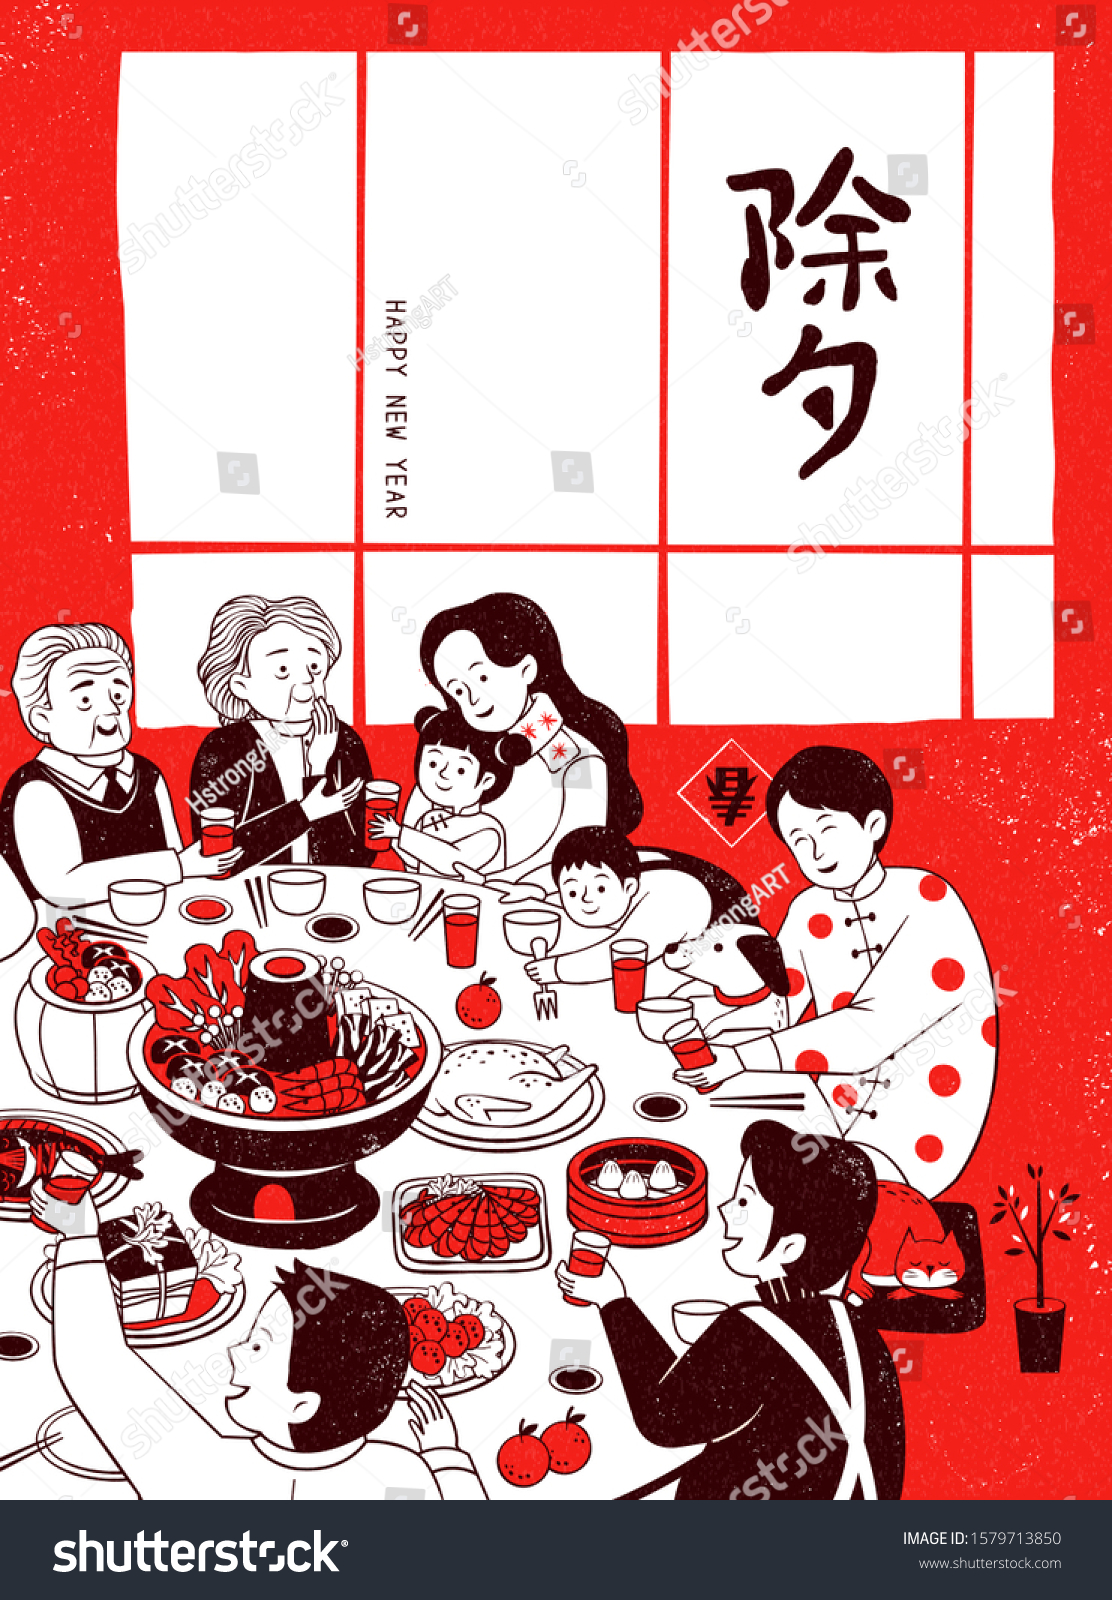 SVG of Extended family lively reunion dinner poster in red, white and black, Chinese text translation: spring and new year's eve svg